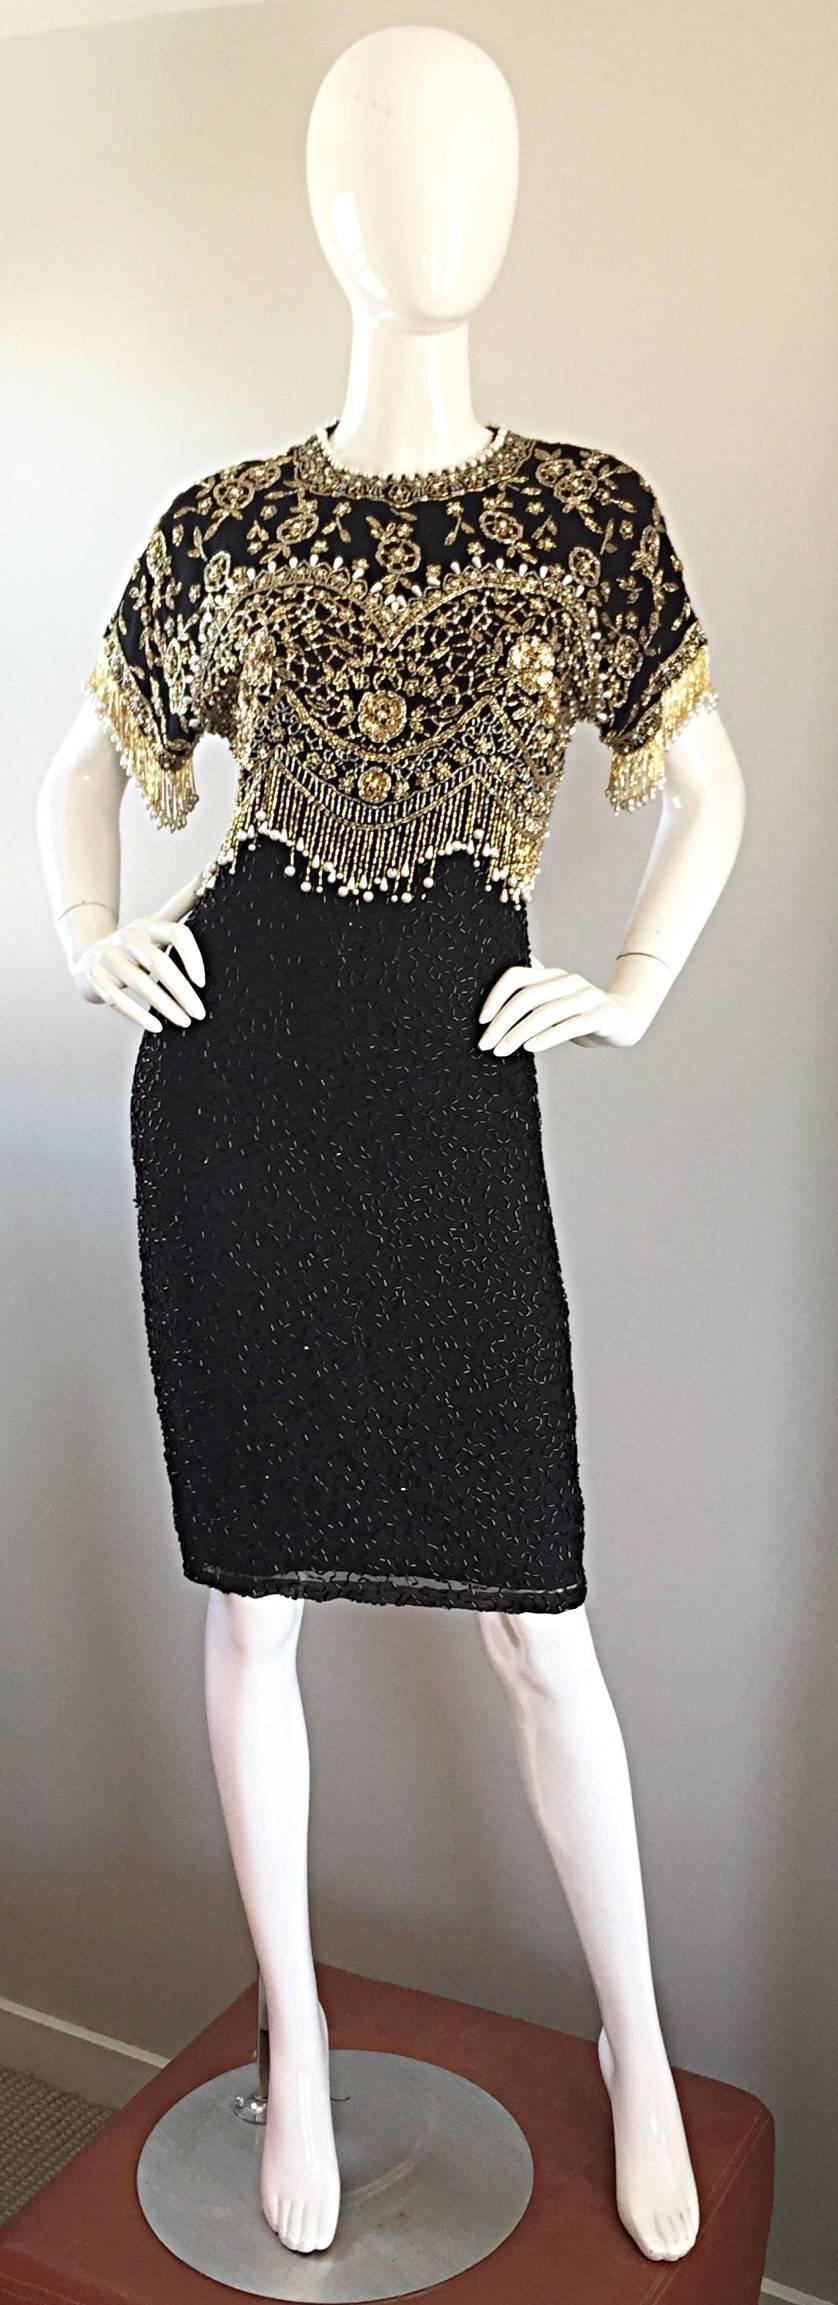 Amazing vintage early 90s LILLIE RUBIN black beaded, sequined, and pearled silk cocktail flapper dress! Heavily hand beaded black seed beads throughout the skirt. Gold and silver sequins and beads hand-sewn onto the bodice in a tromp o'lei effect